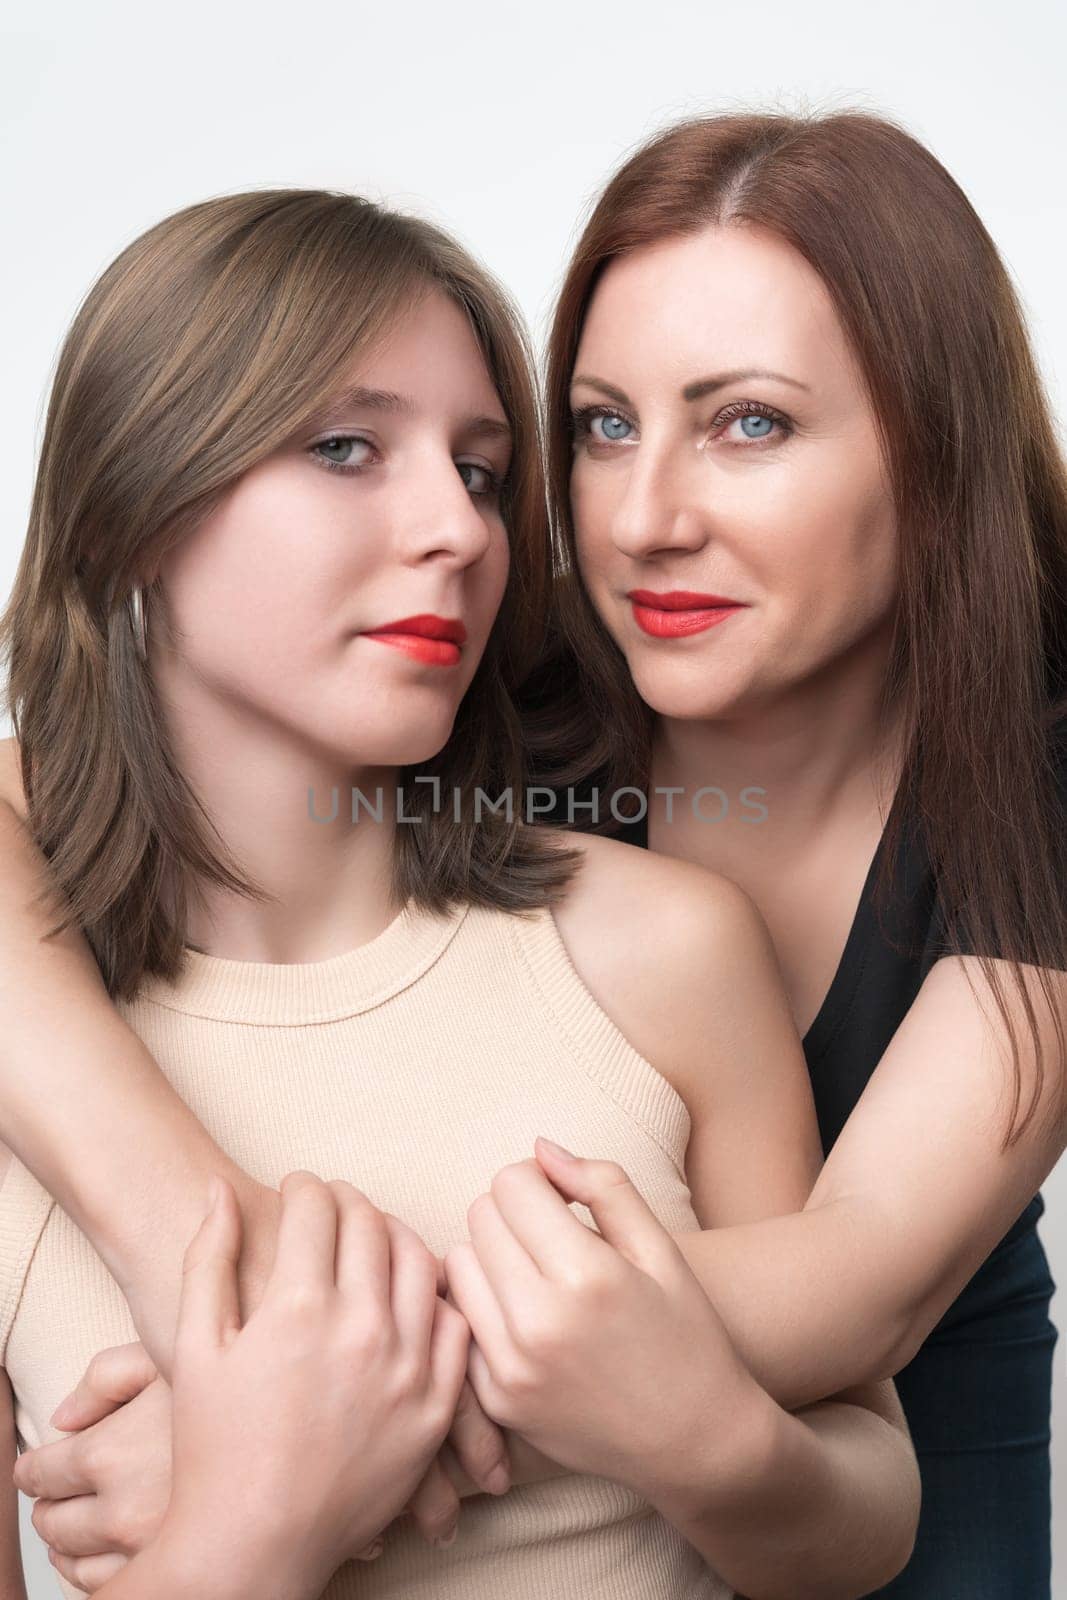 Adult mother gently hugging her teenage daughter standing behind. Friendly Caucasian ethnicity daughter and mom with gray eyes and long hair. Togetherness concept. Studio shot, part of photo series